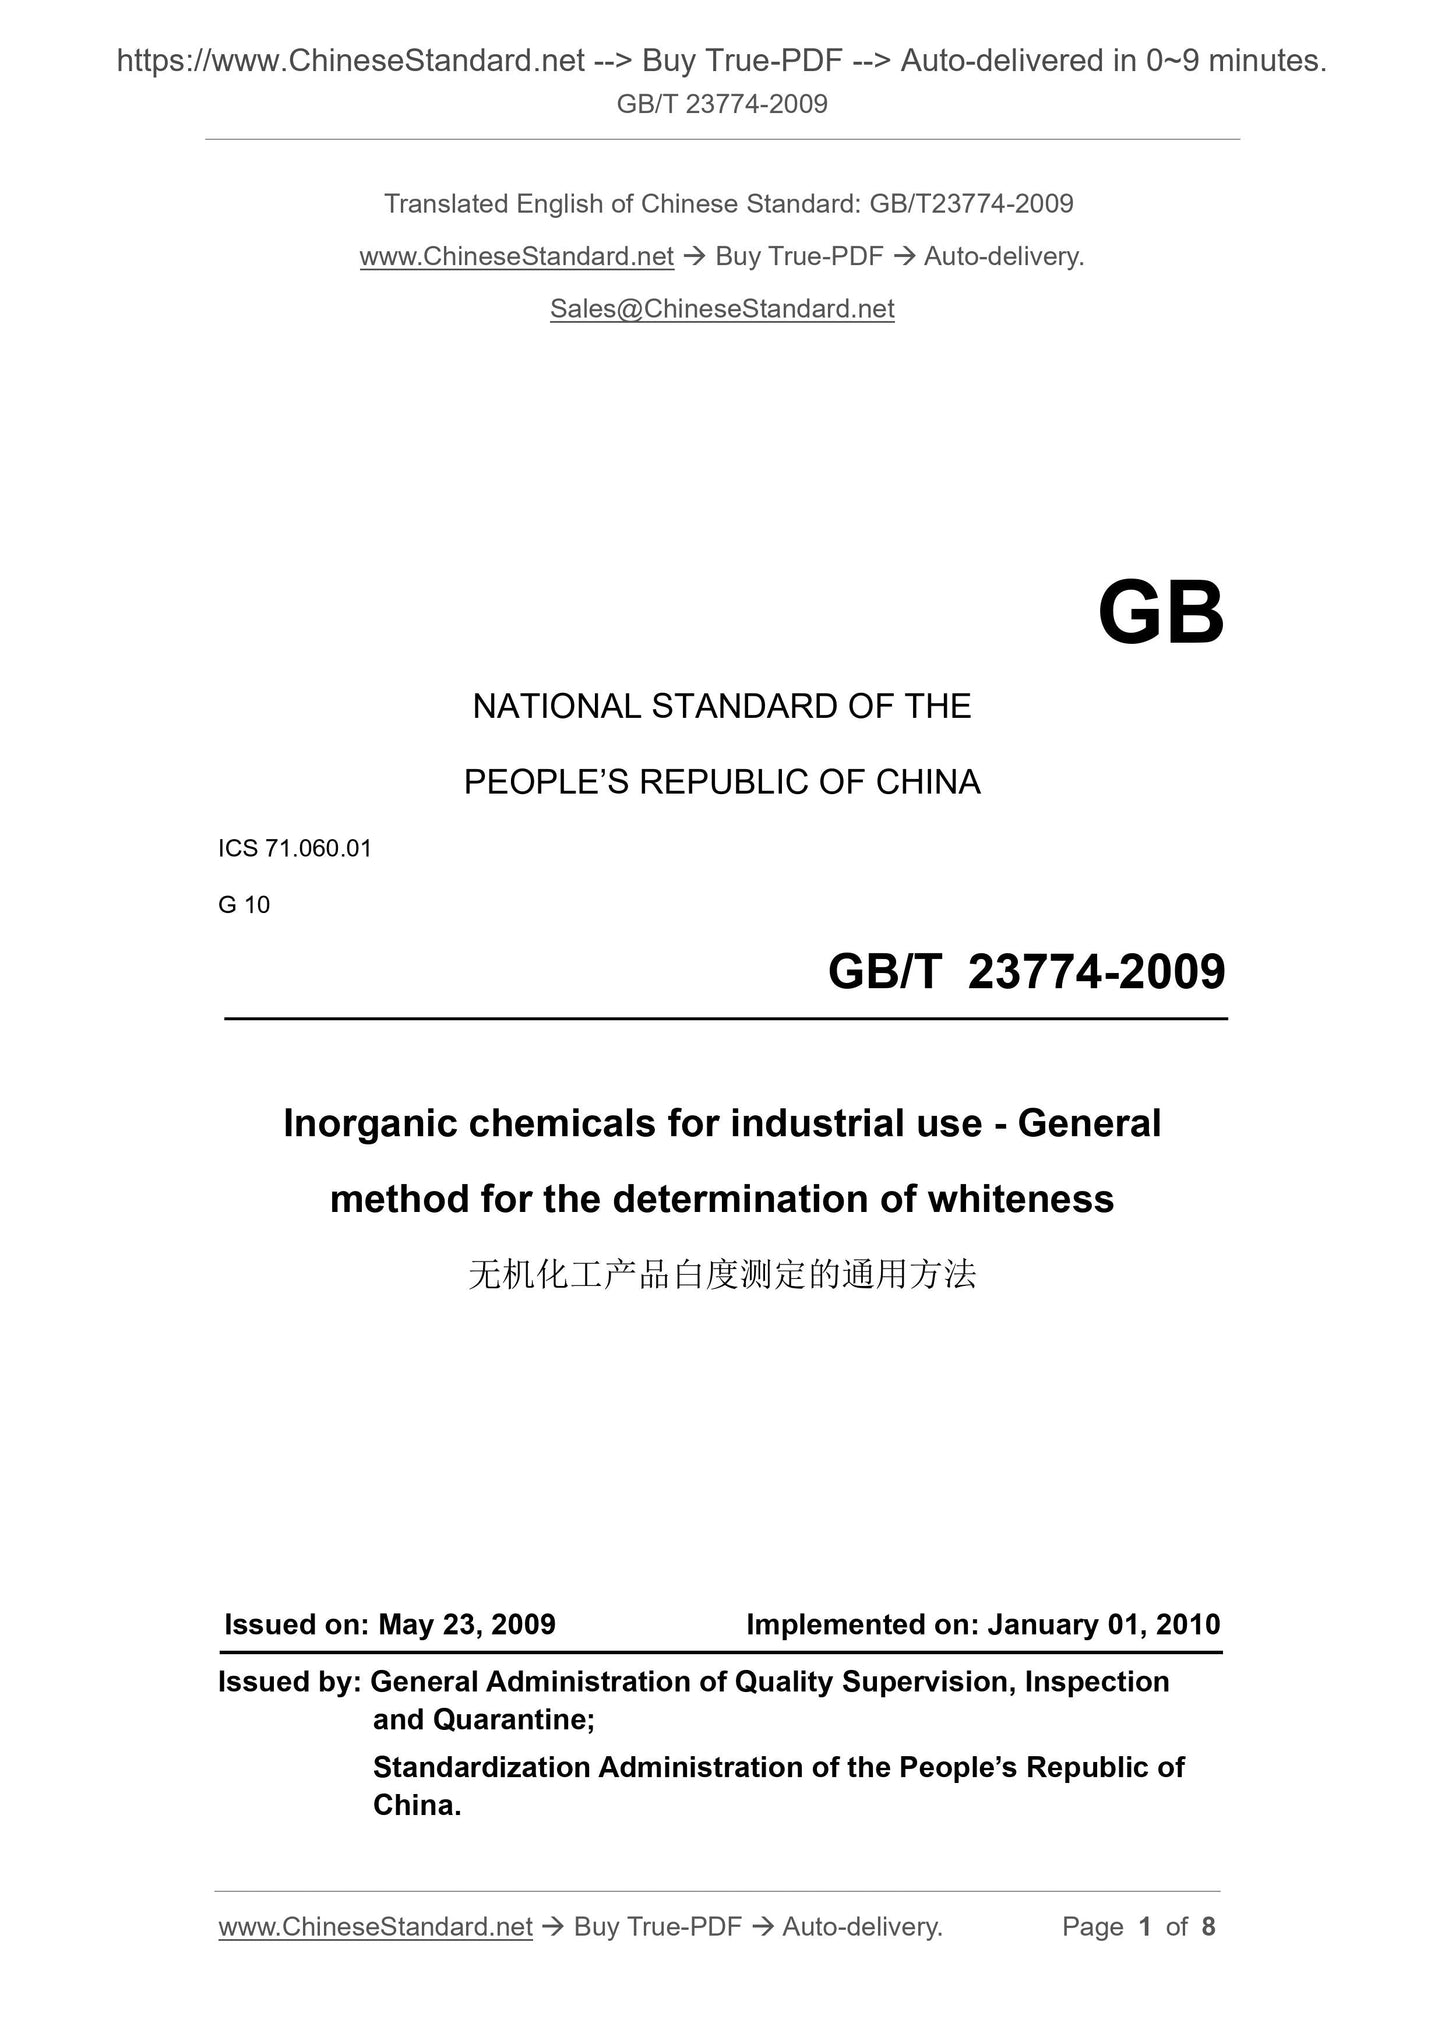 GB/T 23774-2009 Page 1